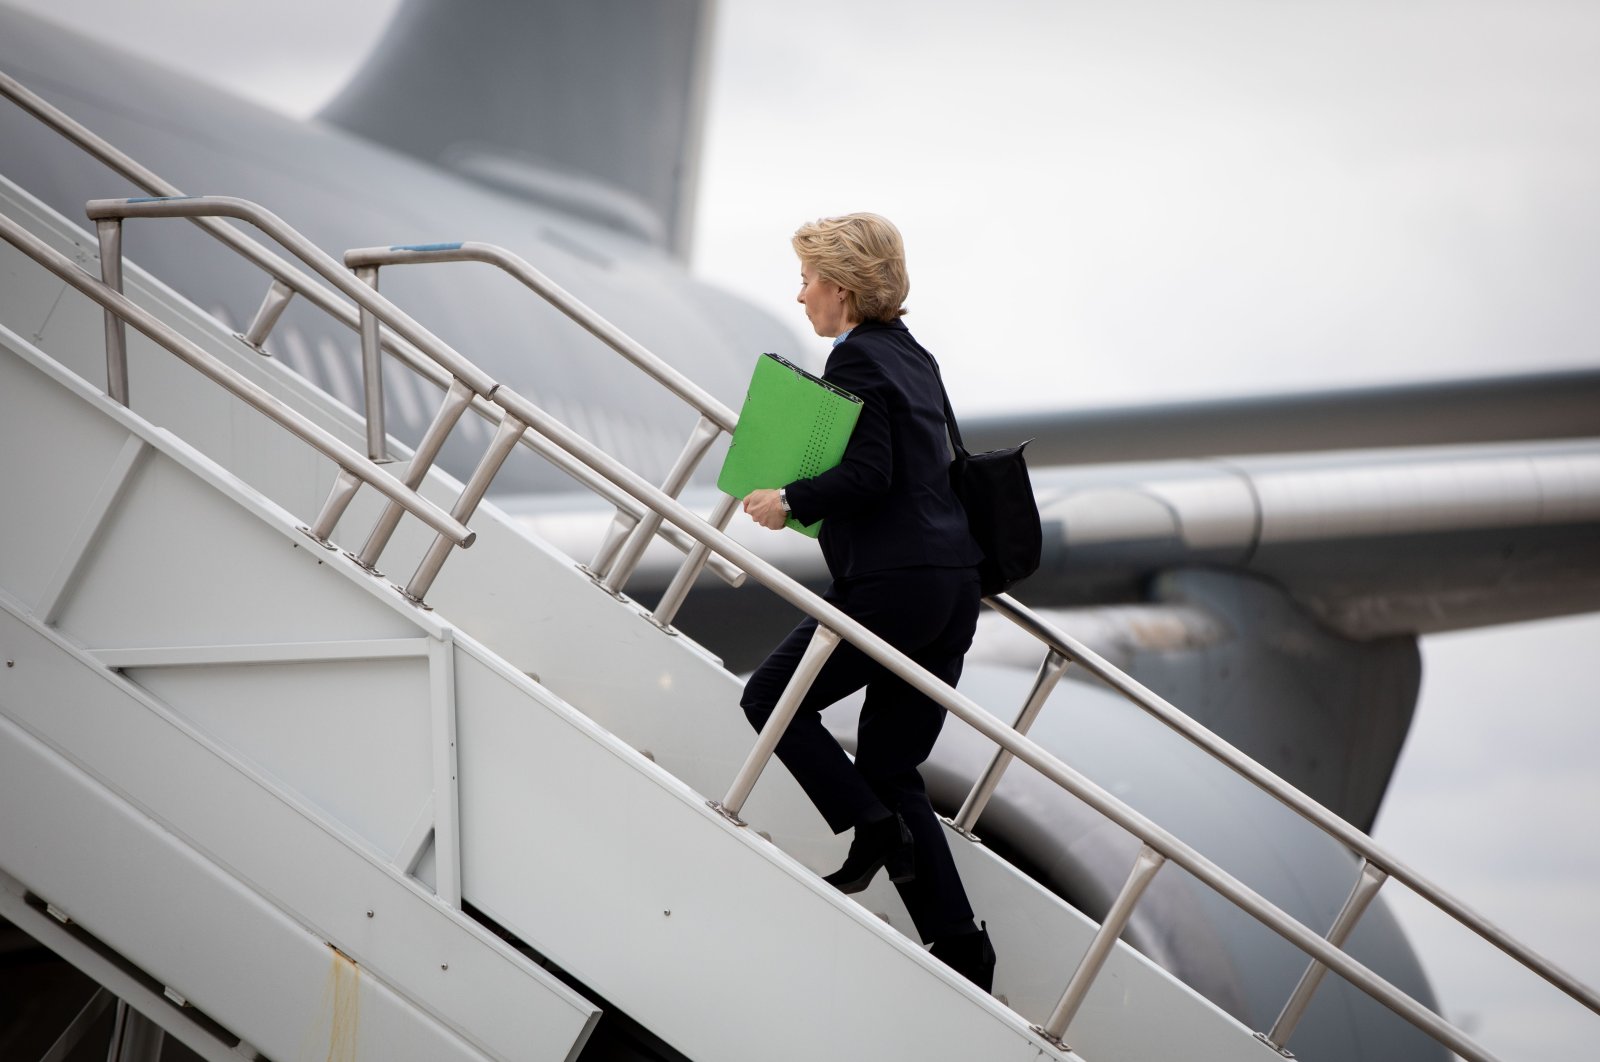 Incumbent European Commission President and then German Defense Minister Ursula von der Leyen (CDU) goes up the gangway to the air force's Airbus A310 at Washington airport for the return flight to Berlin, Washington, D.C., U.S., April 12, 2019. (Photo by Getty Images)